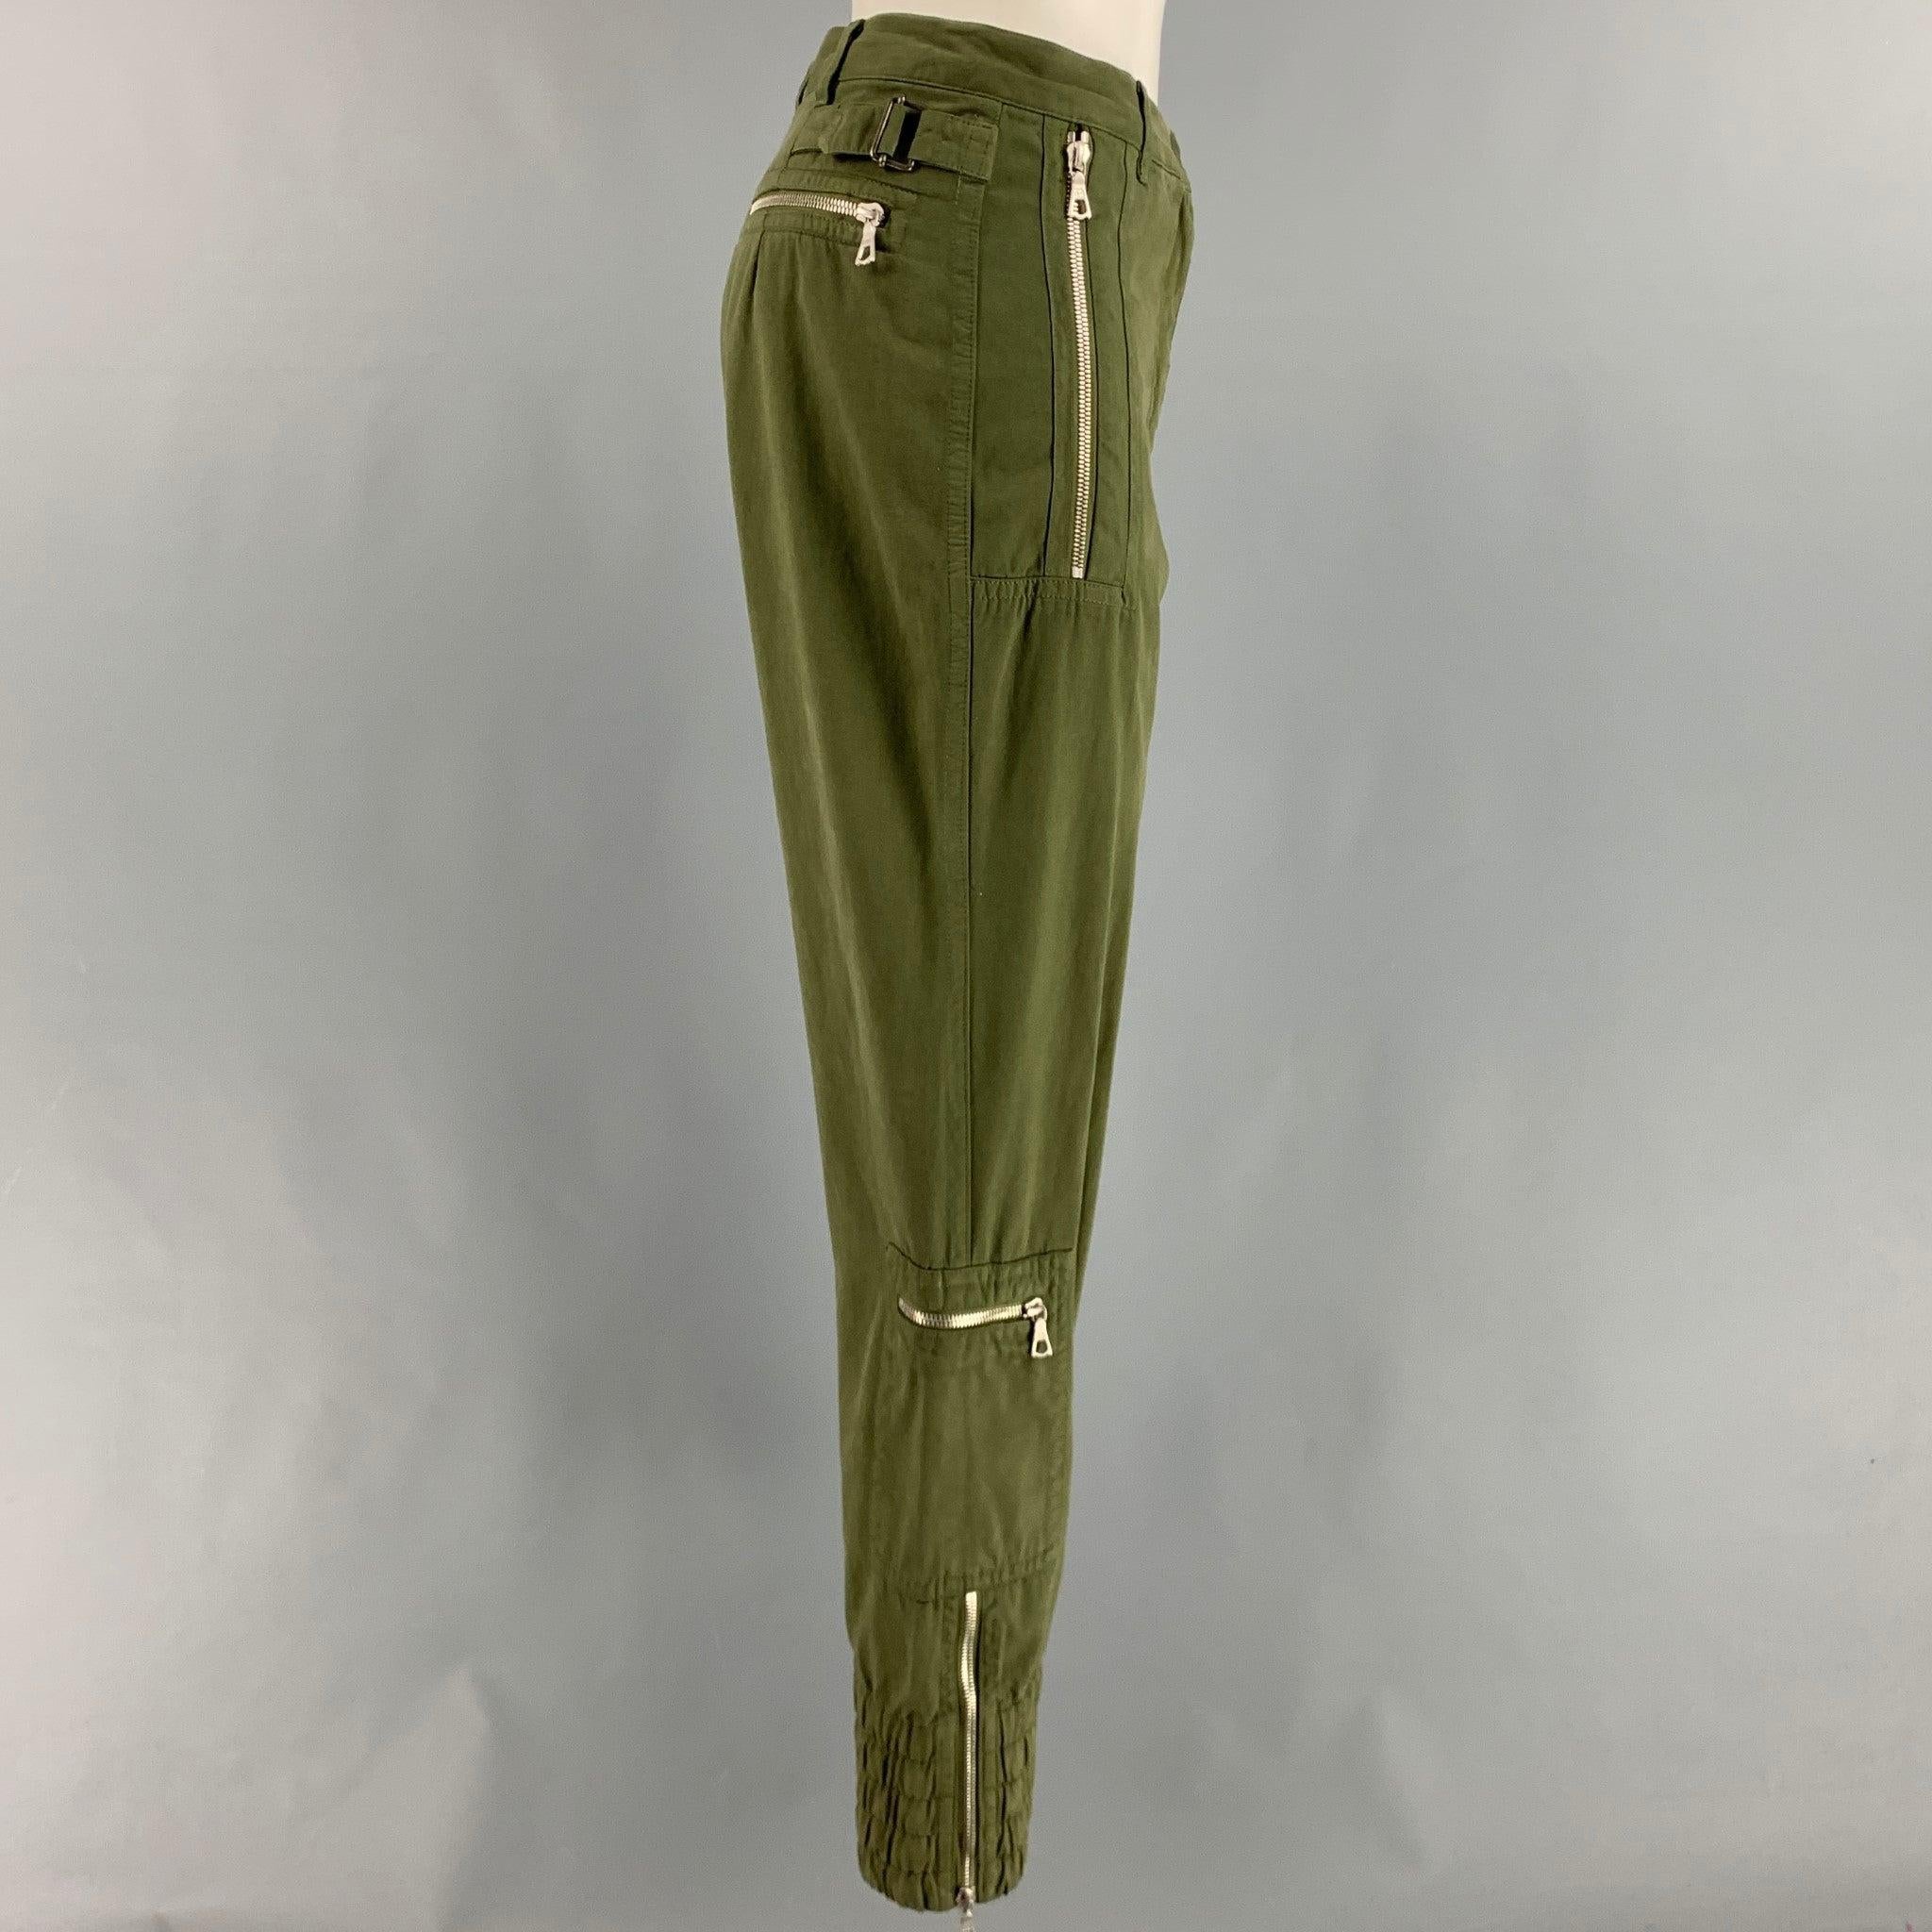 DRIES VAN NOTEN casual pants
in an olive green cotton fabric featuring zipper pockets, adjustable side tabs, elastic cuffs, and a zip fly closure. Made in Romania.New With Tags. 

Marked:   36 

Measurements: 
  Waist: 28 inches Rise: 8.5 inches